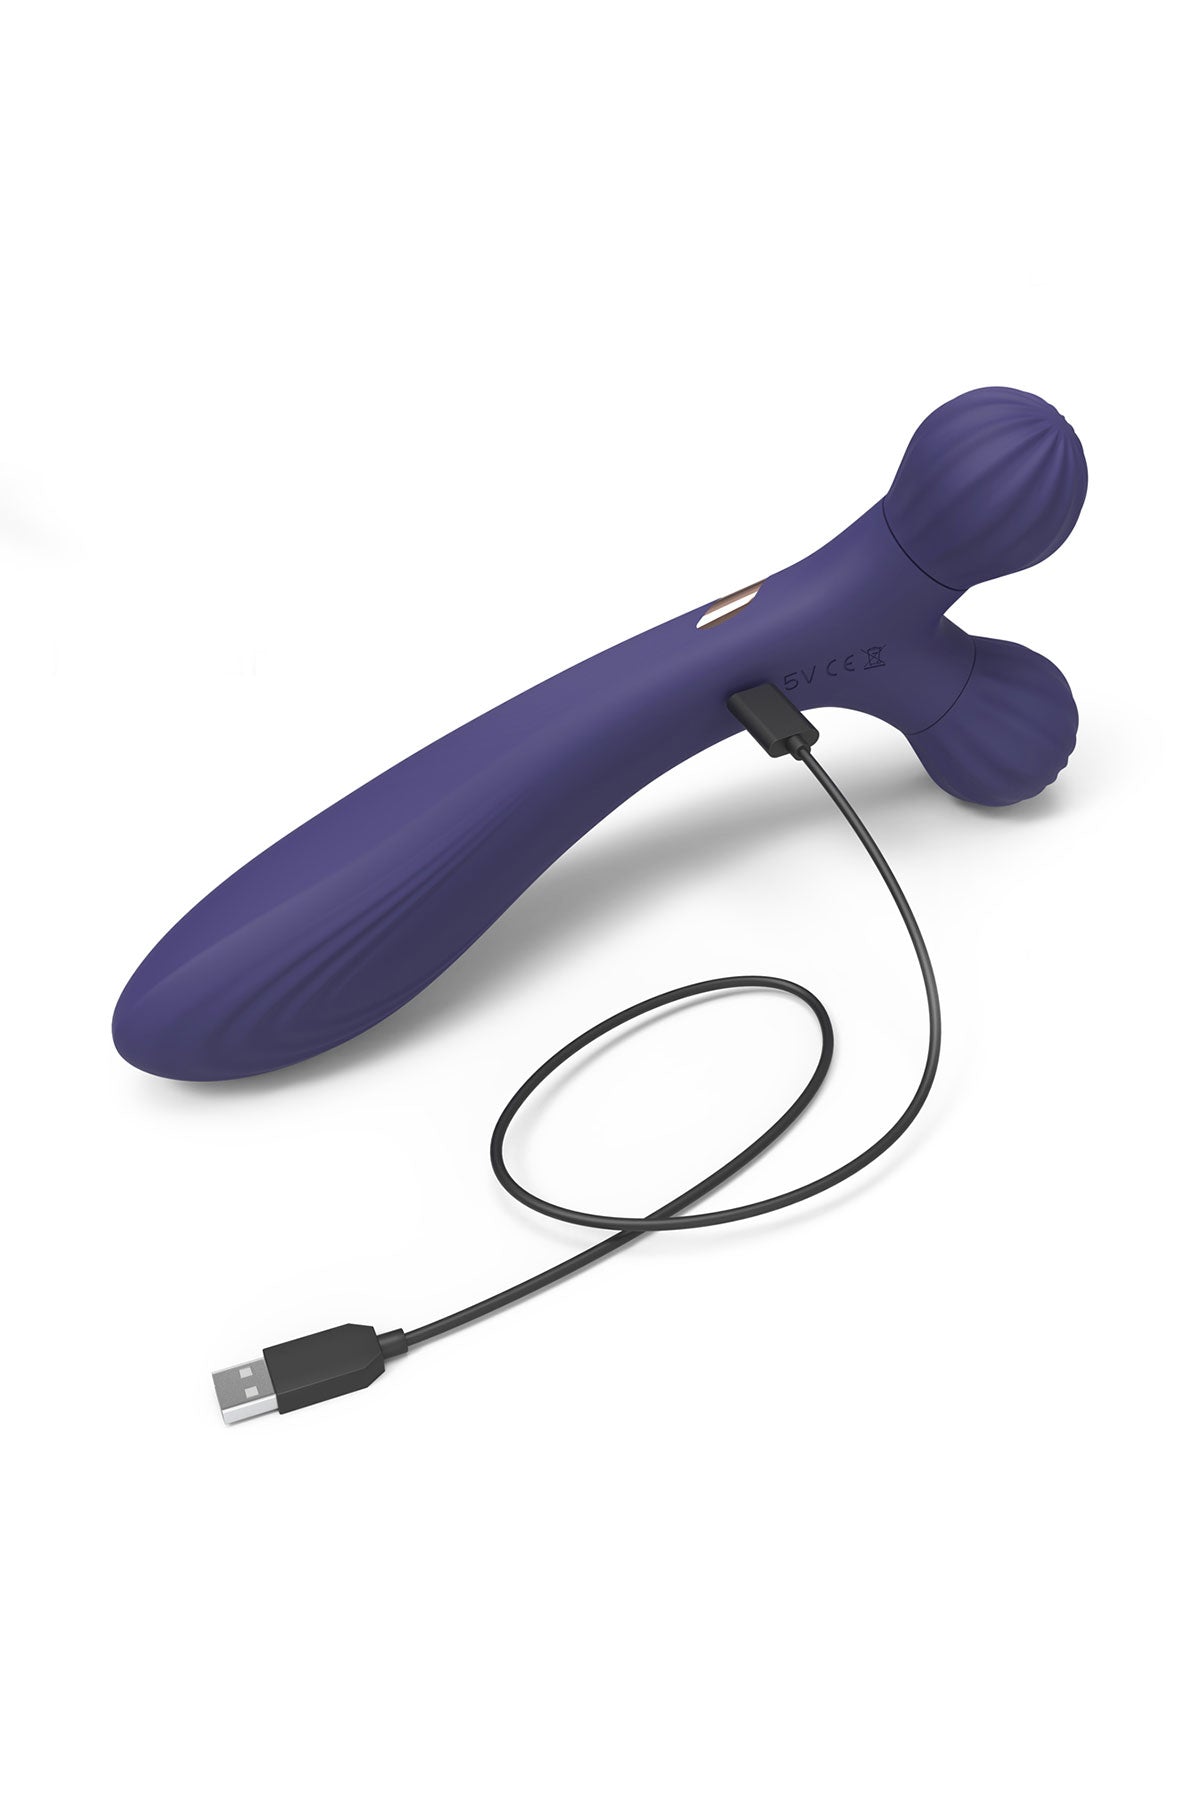 CAbleFireball Massage Wand by Love to Love 